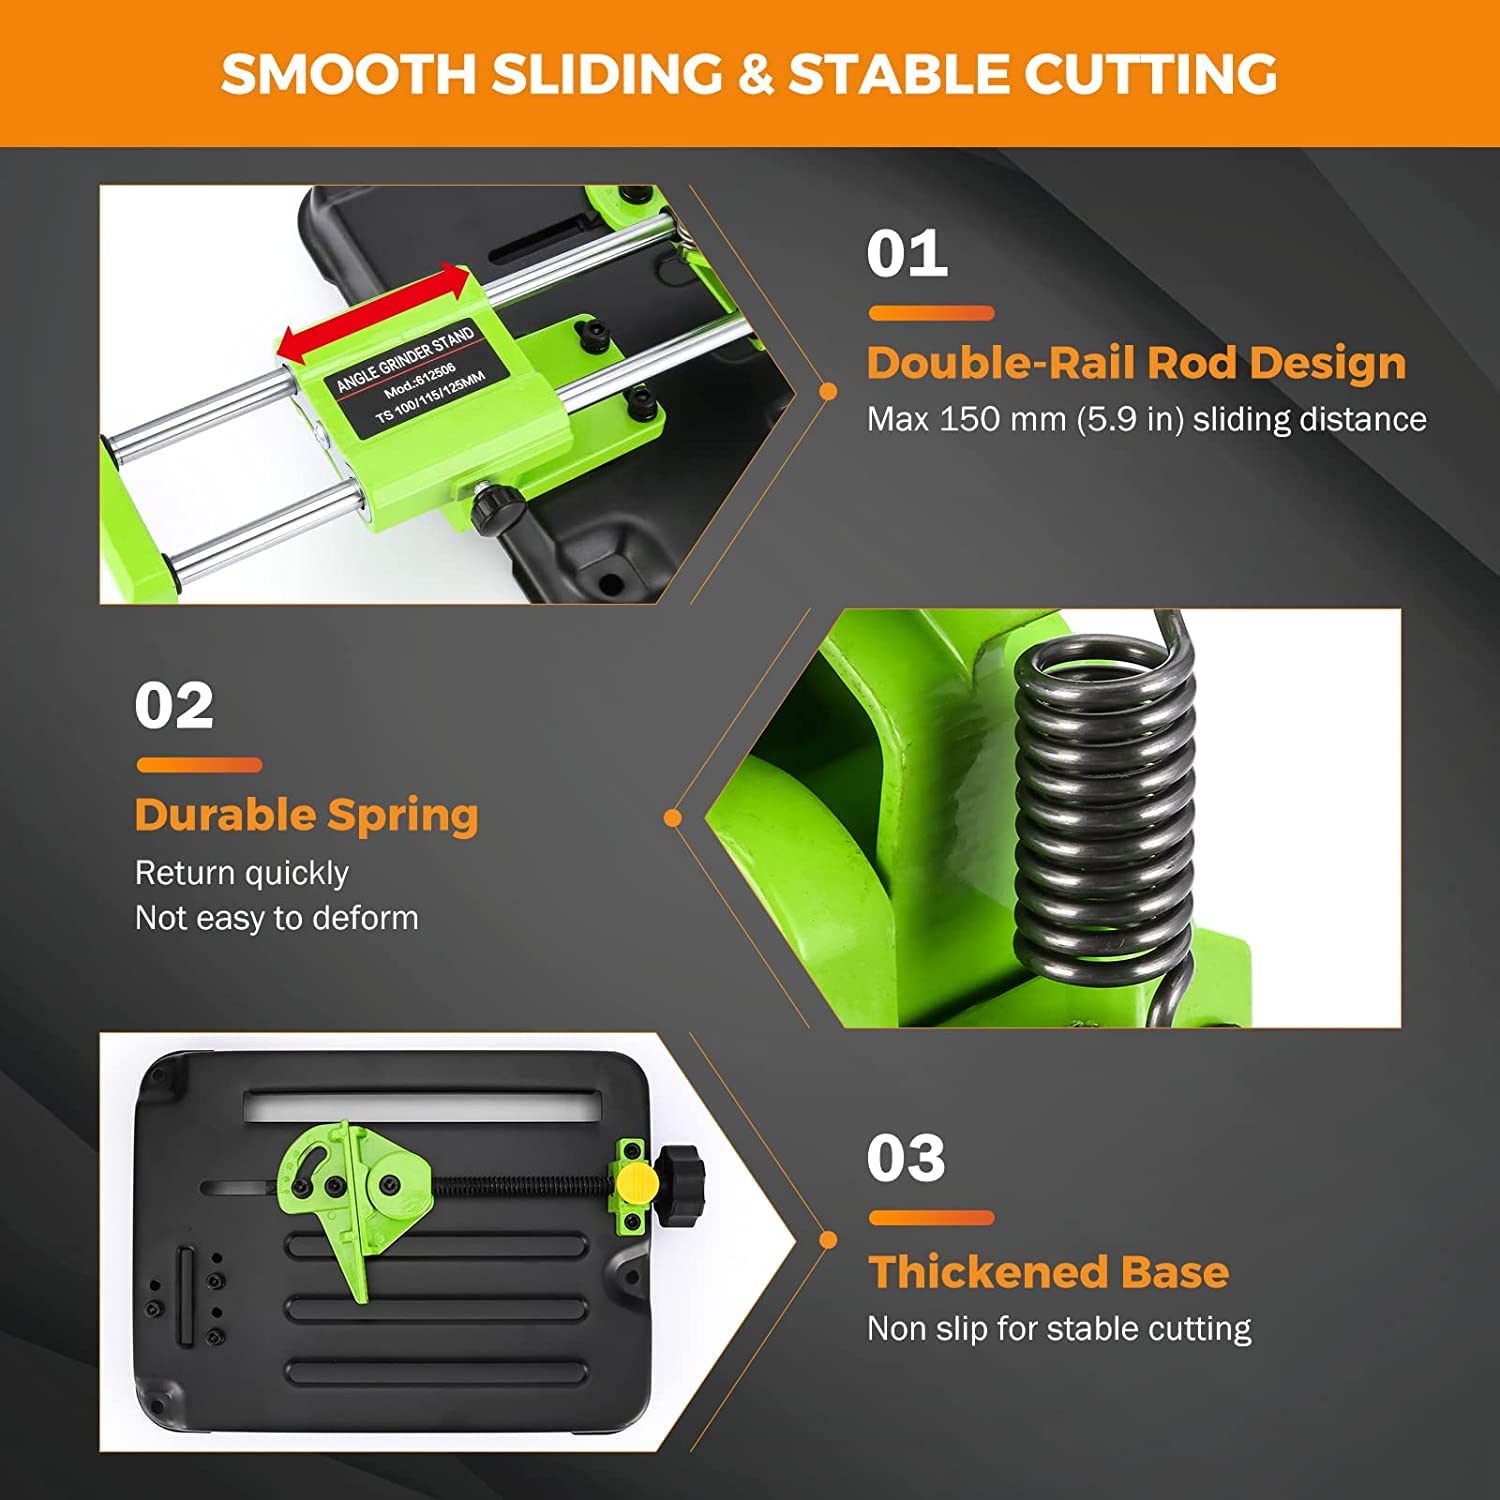 CHESTON Angle grinder sliding stand/Multi-functional sliding rod Bracket universal compatibility with 4” / 5” Grinding Cutting Machine.